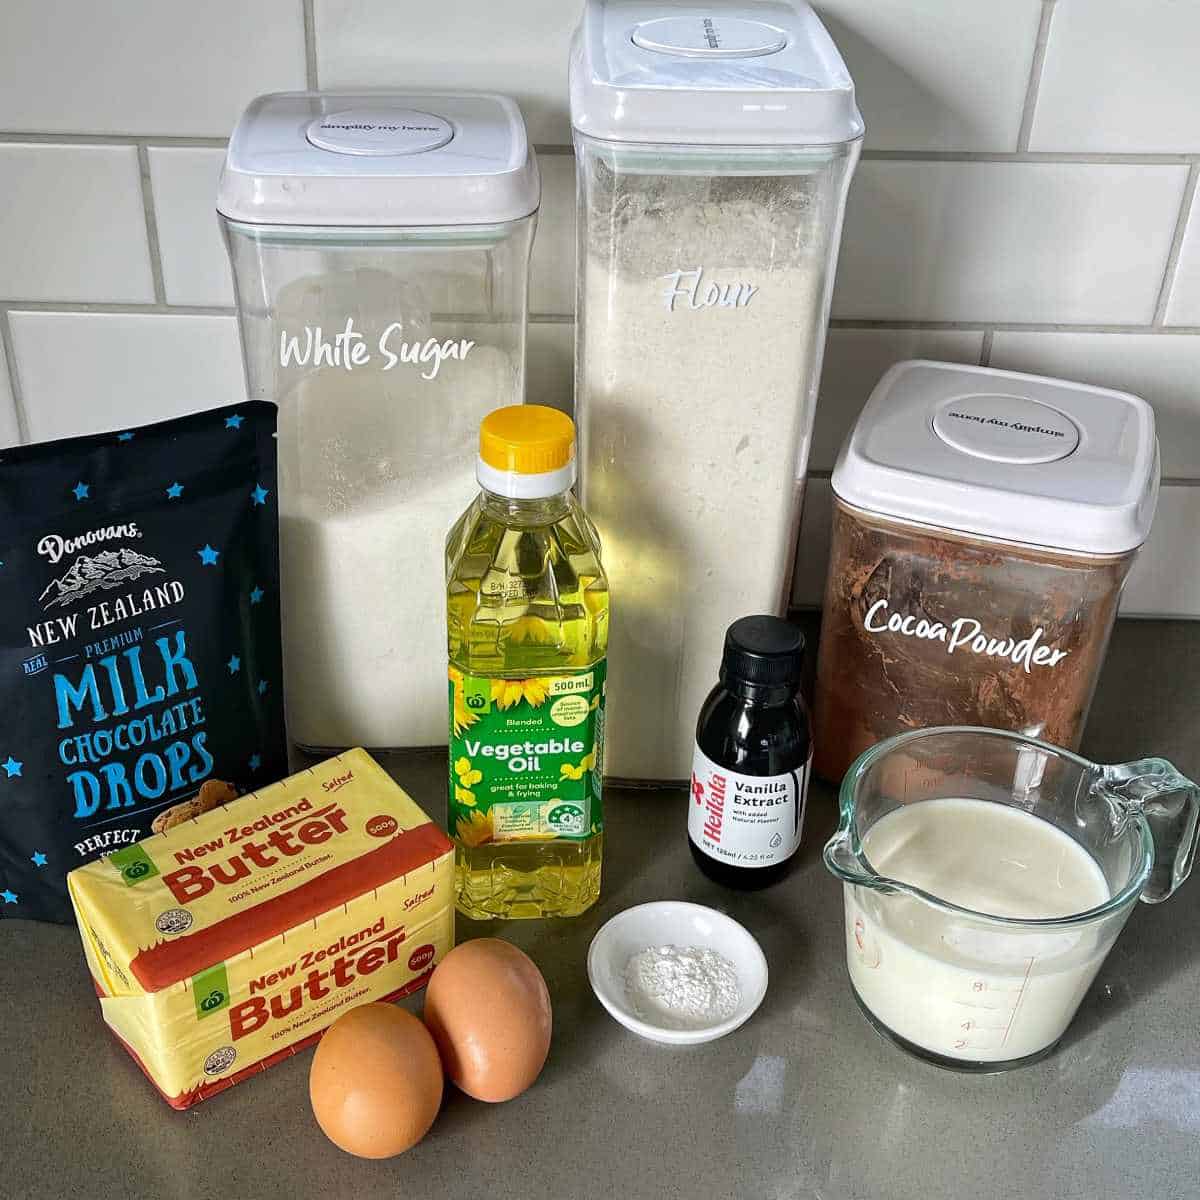 The ingredients for chocolate muffins